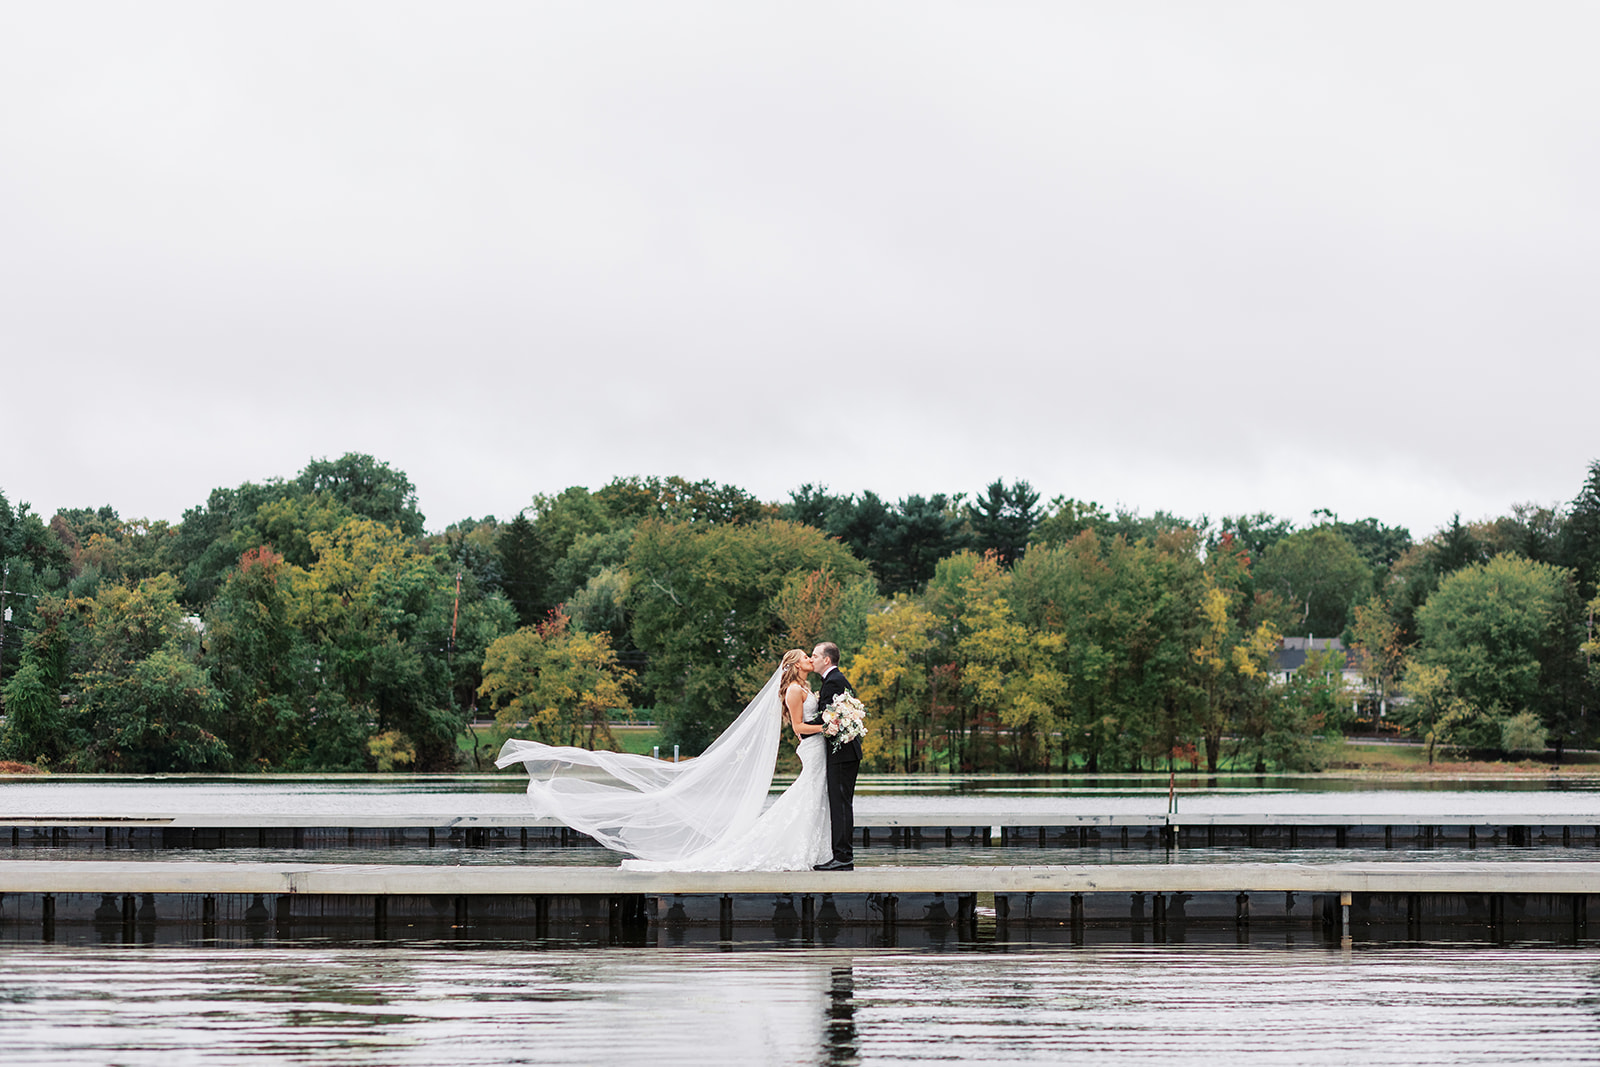 Newlyweds kiss as the veil blows in the wind on the center of a long floating dock in a lake at New Jersey Waterfront Wedding Venues